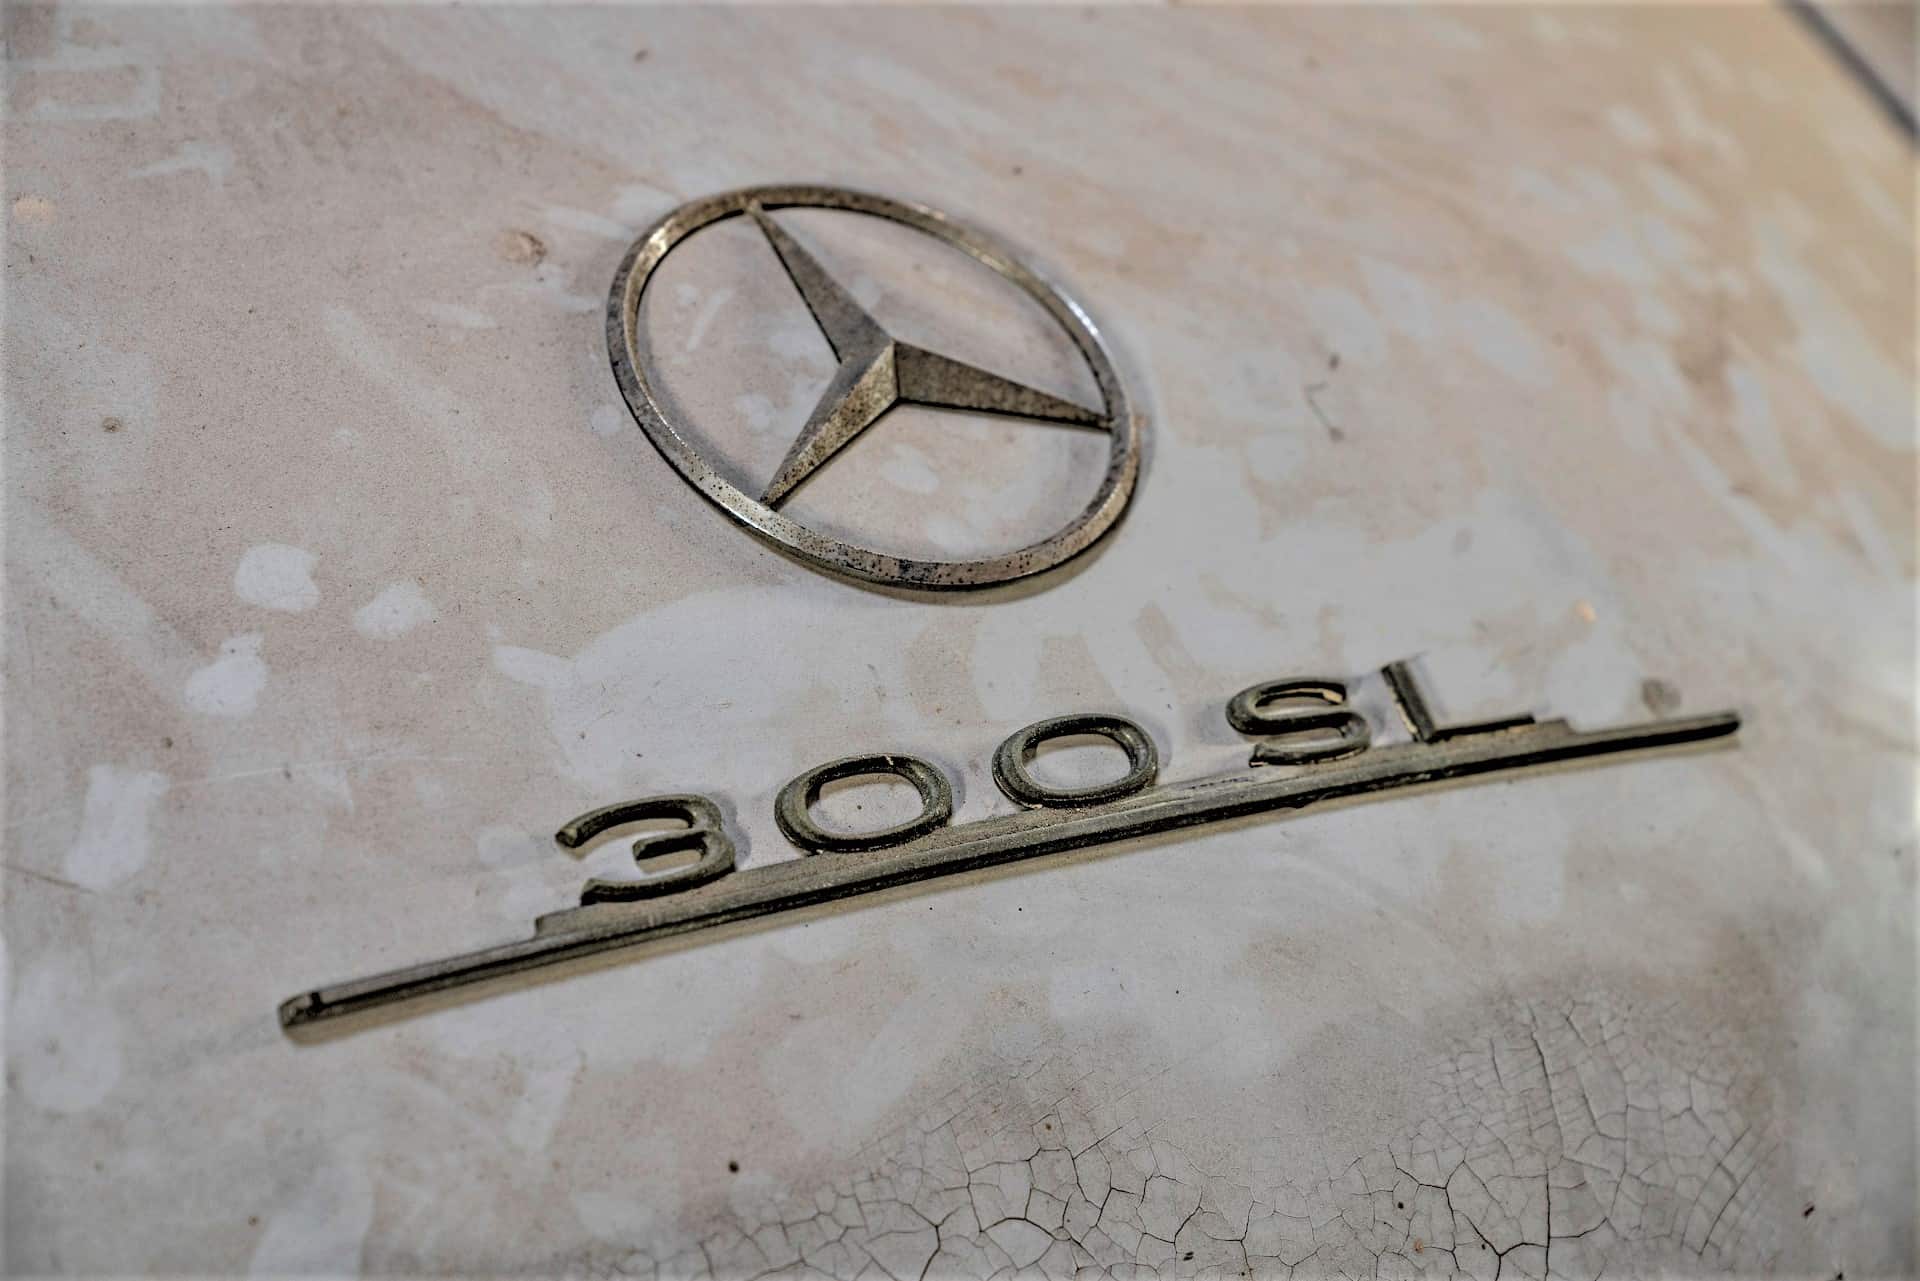 The origins of the Mercedes-Benz 3-pointed star logo